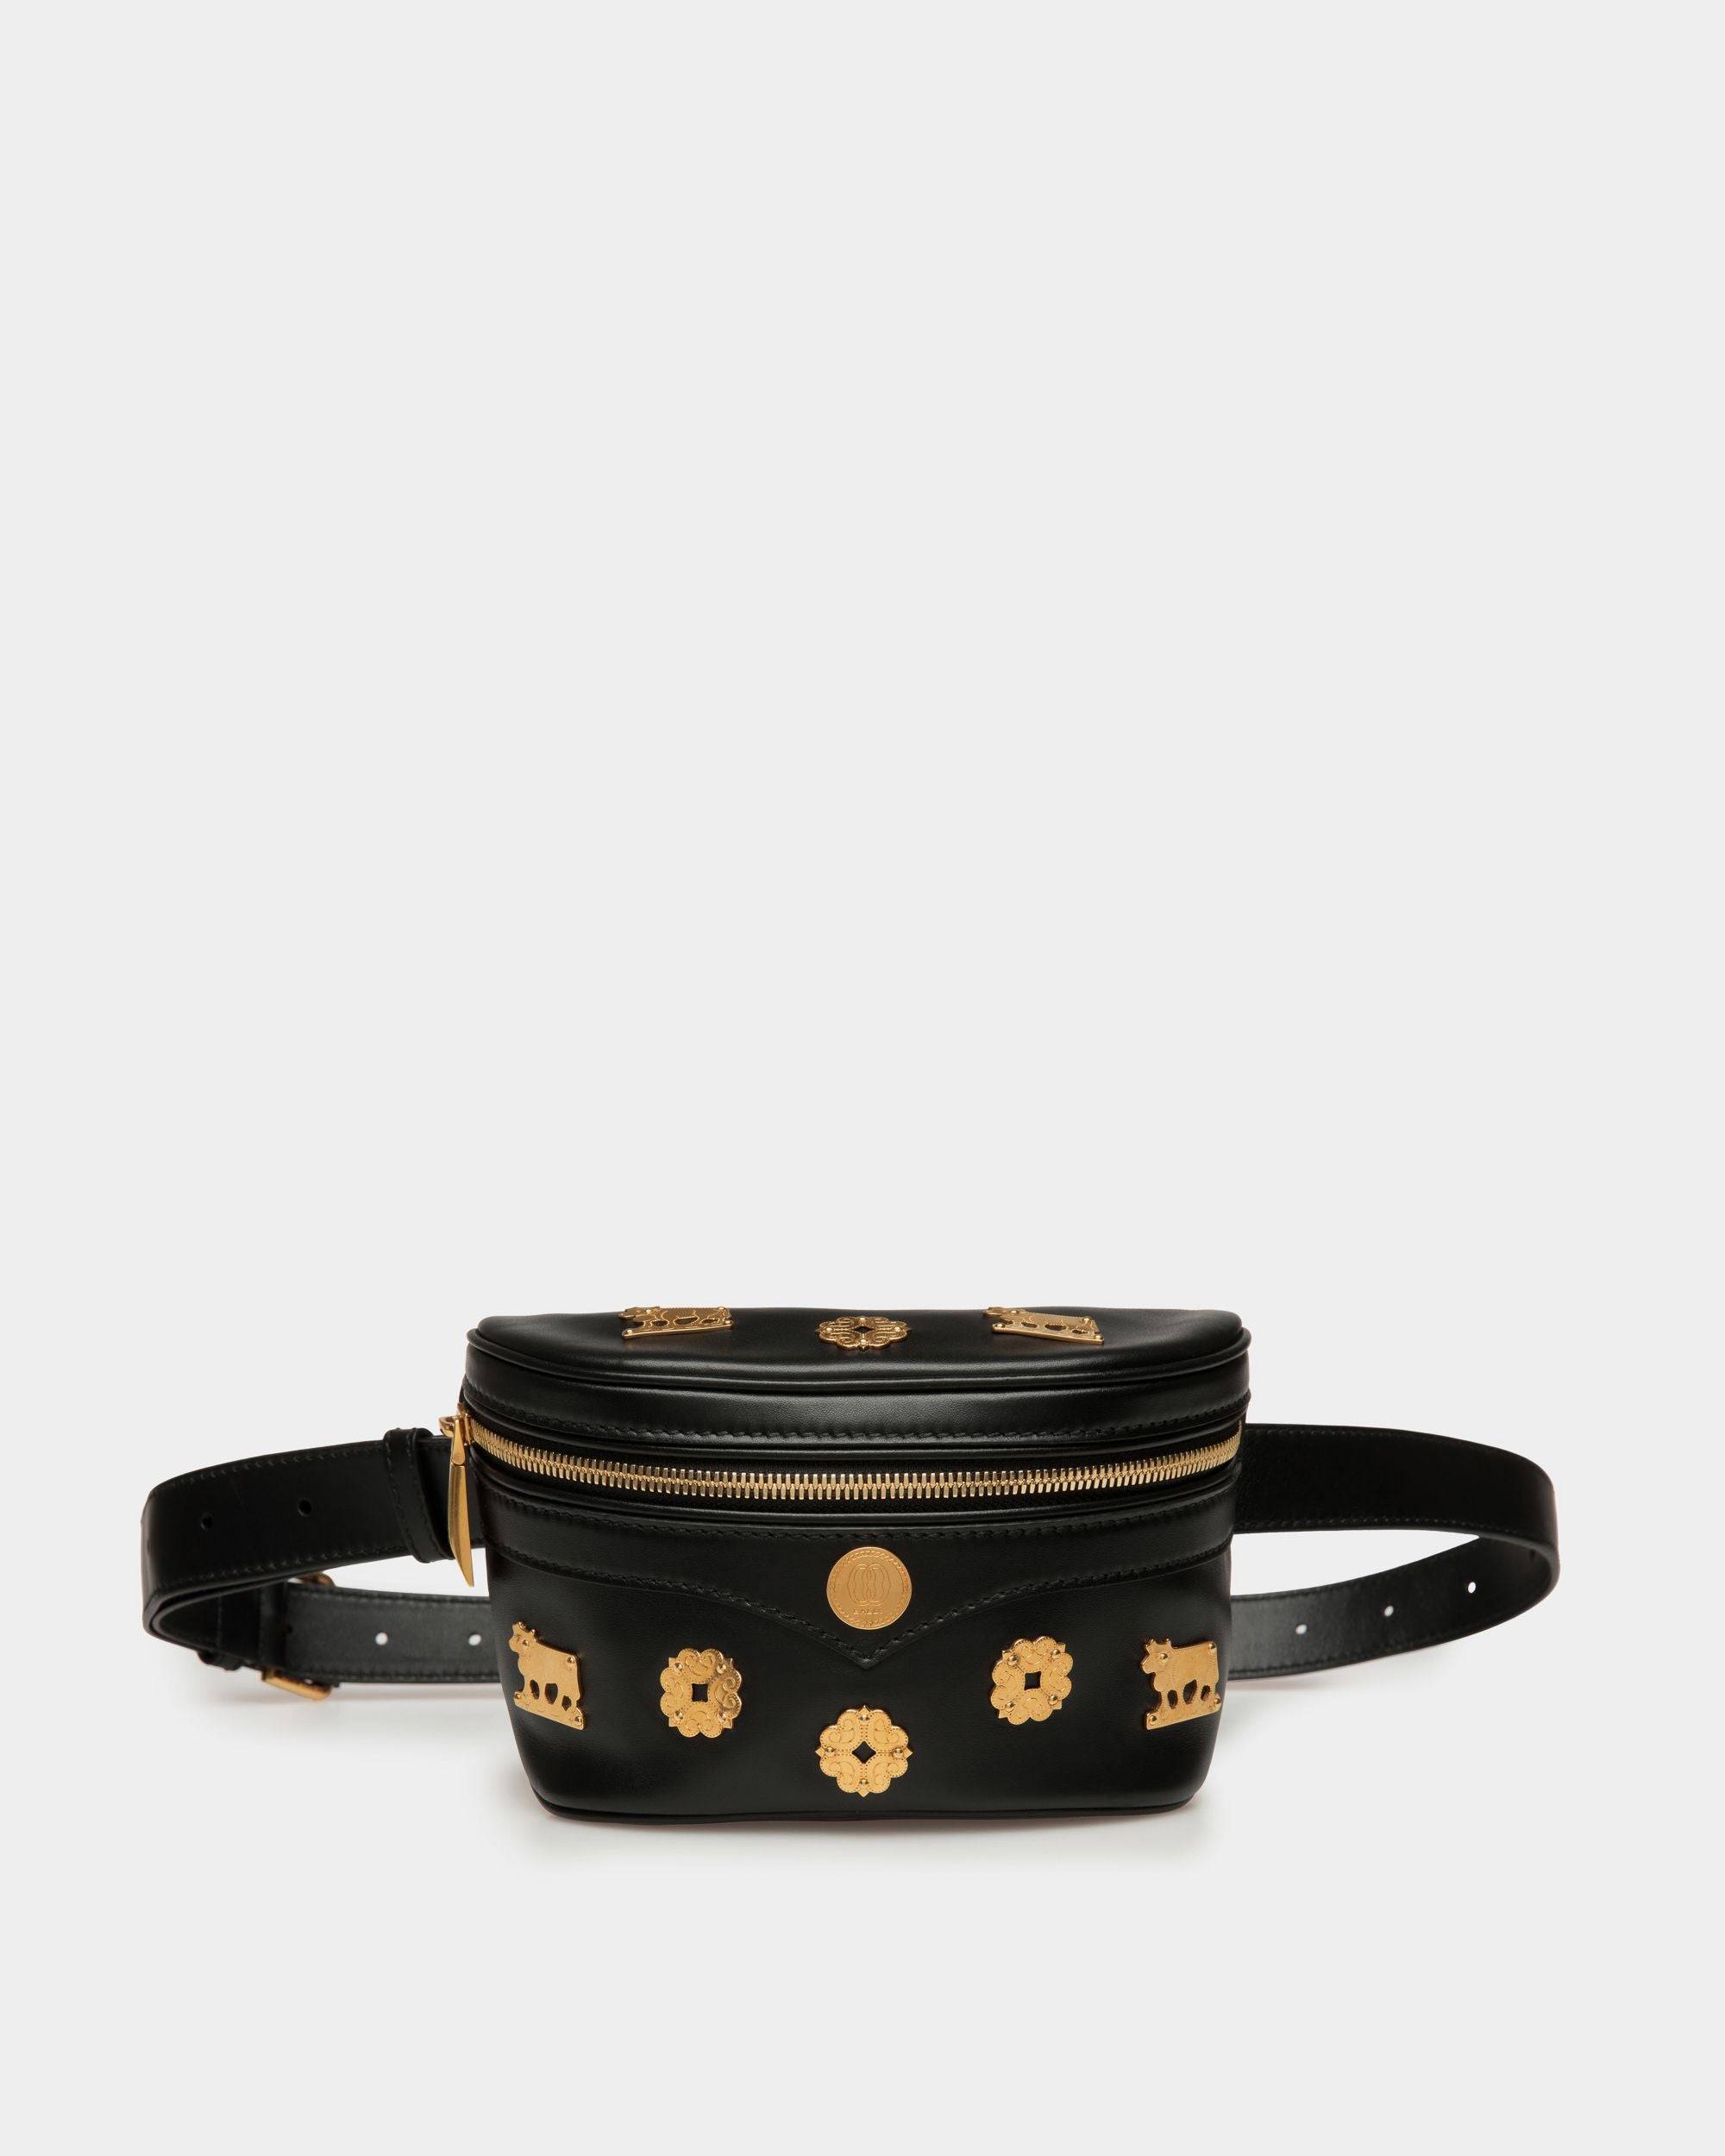 Moutain | Women's Belt Bag  in Black Leather | Bally | Still Life Front